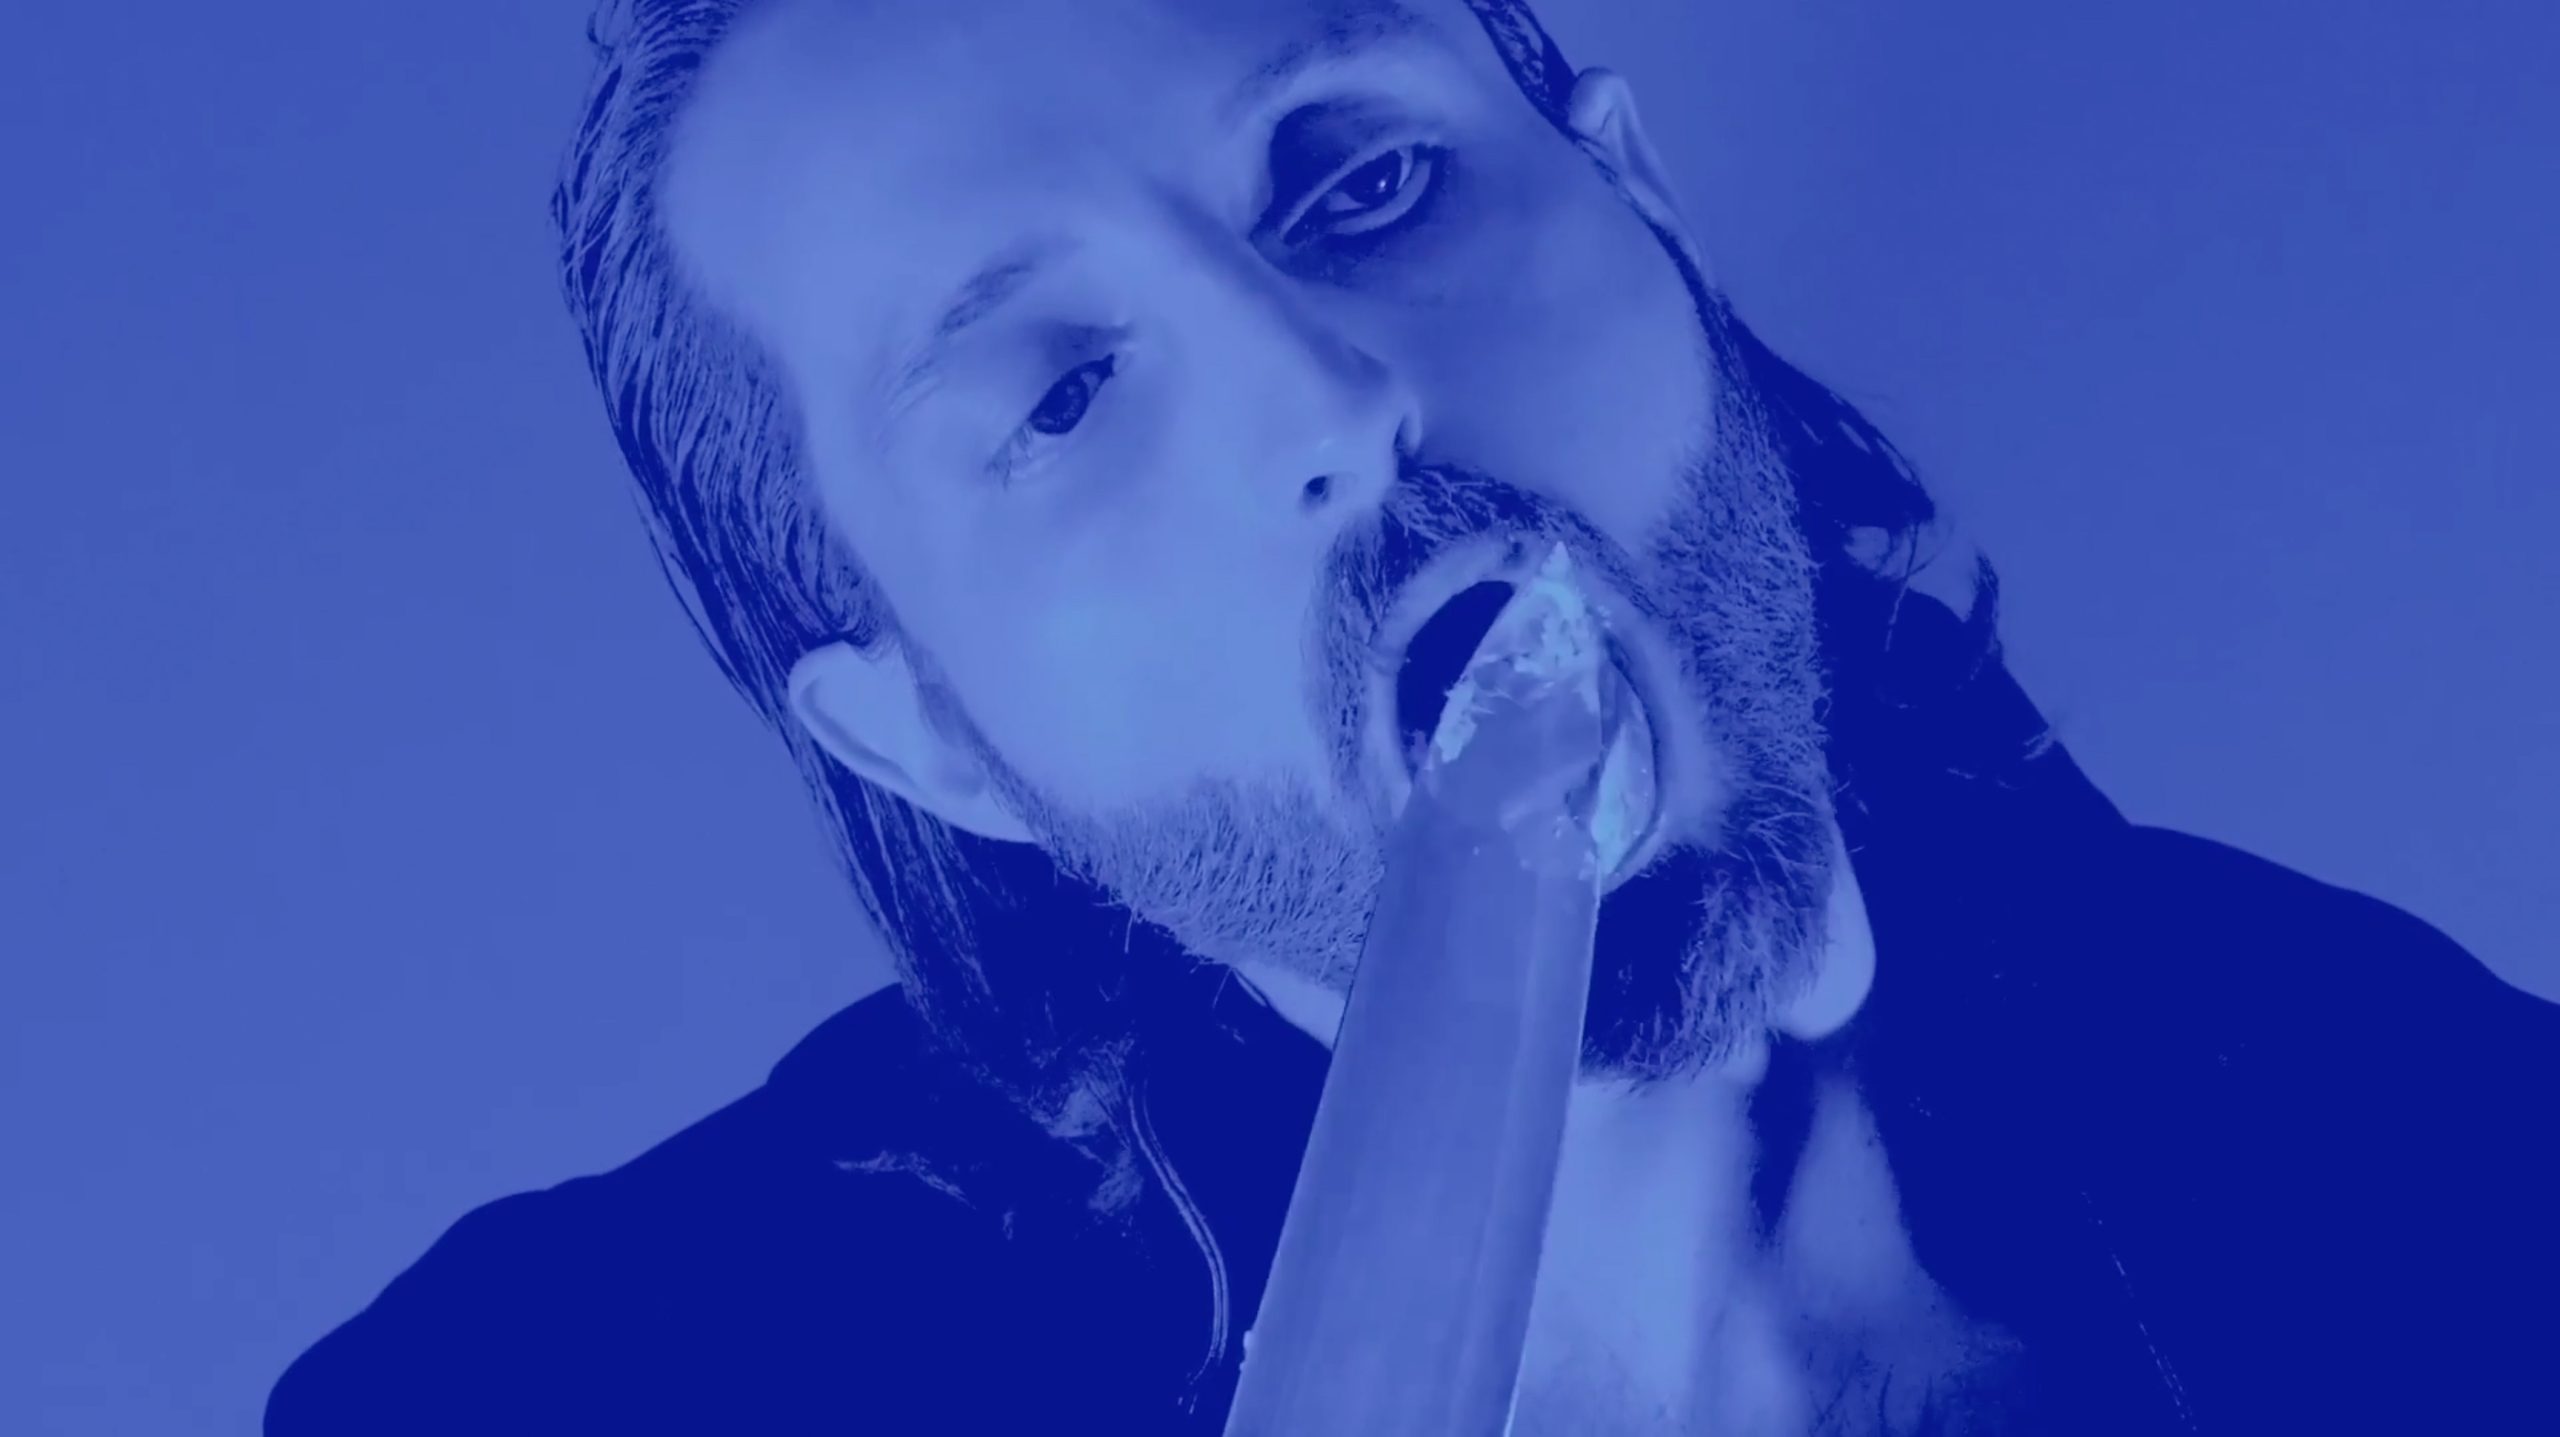 In blue light a white man with beard and swept back hair licks a large knife